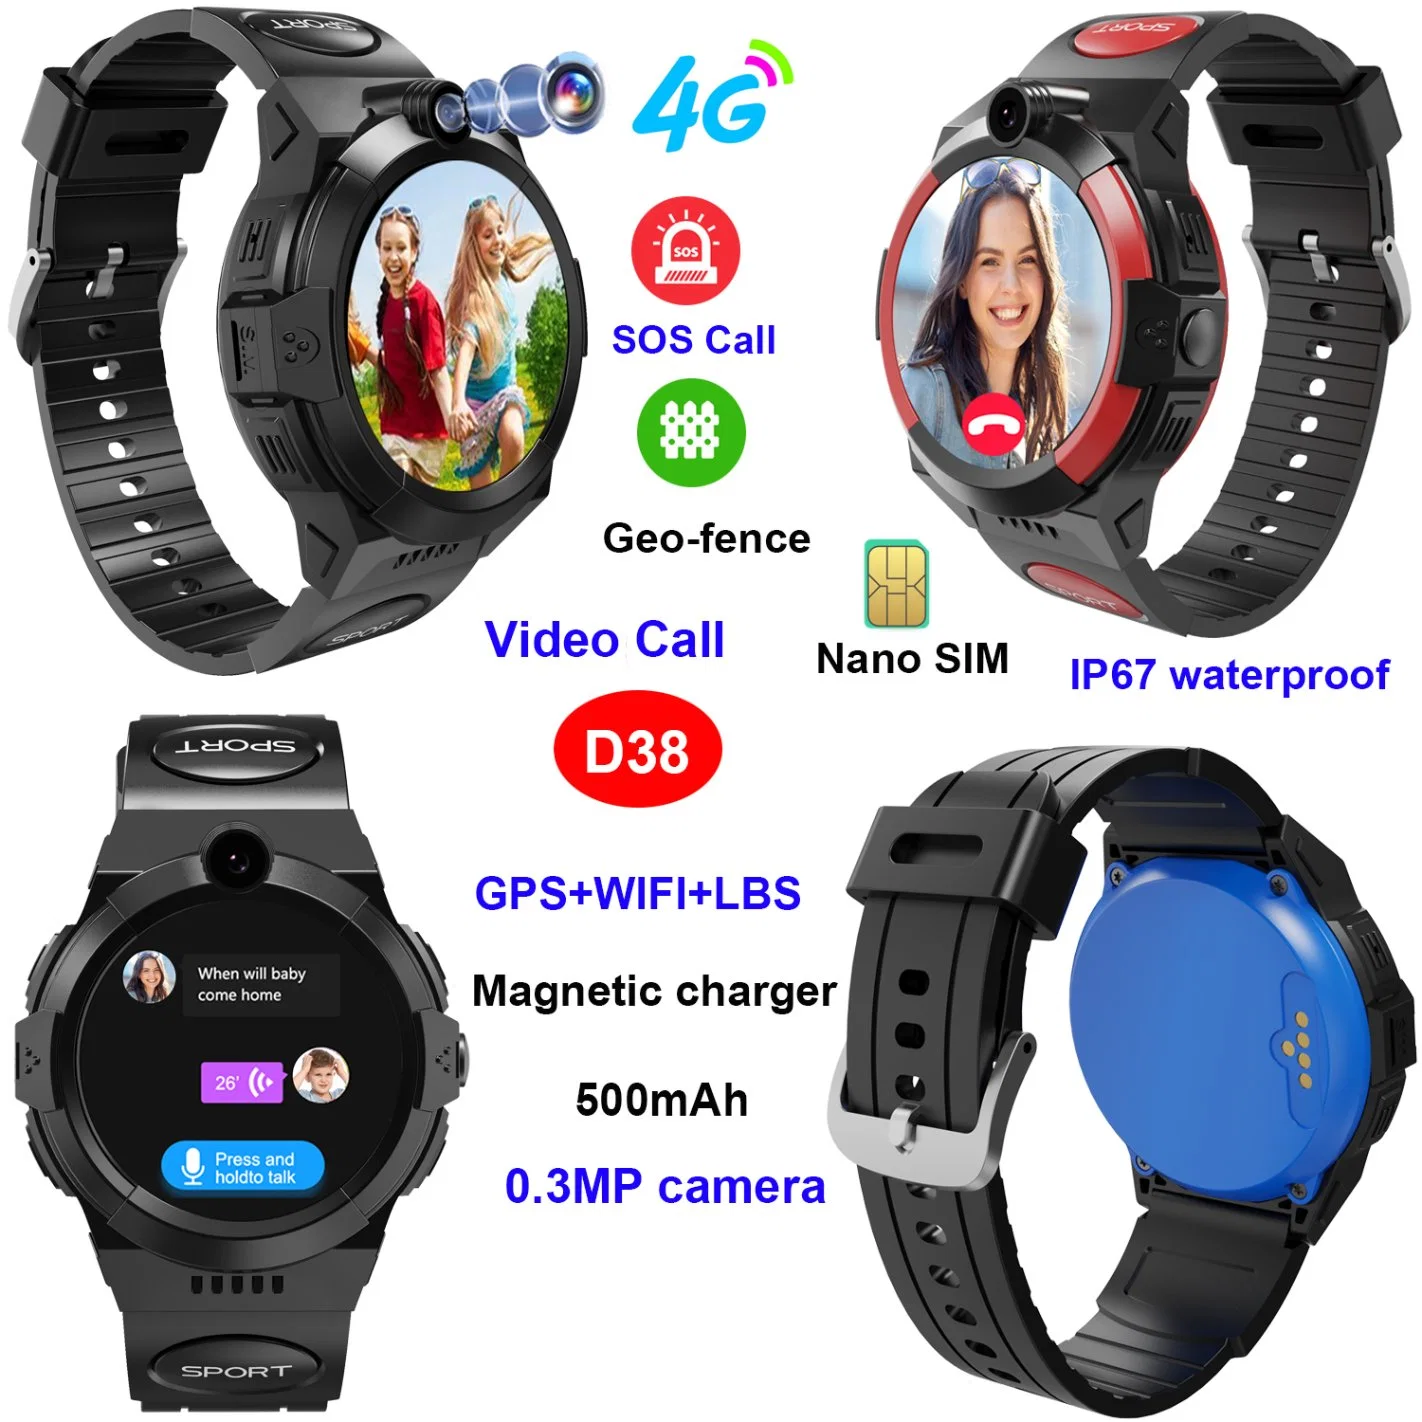 Fashion 4G IP67 Water resistance Parental Control round screen Students Child Watch GPS tracking with free global Two Way Video Call for Kids D38